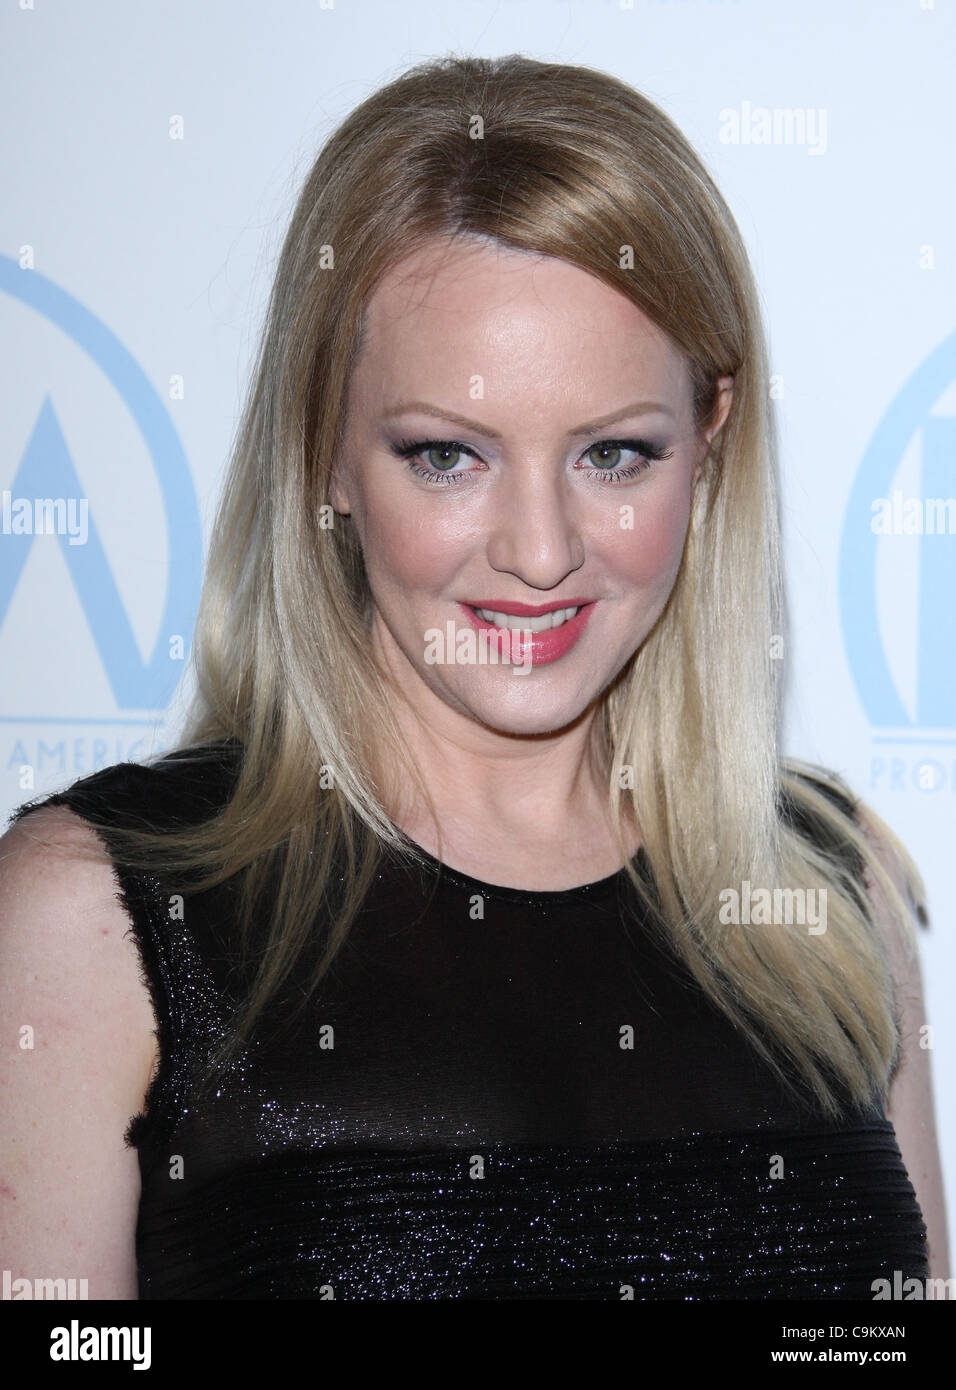 WENDI MCLENDON-COVEY 23RD ANNUAL PRODUCERS GUILD OF AMERICA AWARDS BEVERLY HILLS CALIFORNIA USA 21 January 2012 Stock Photo